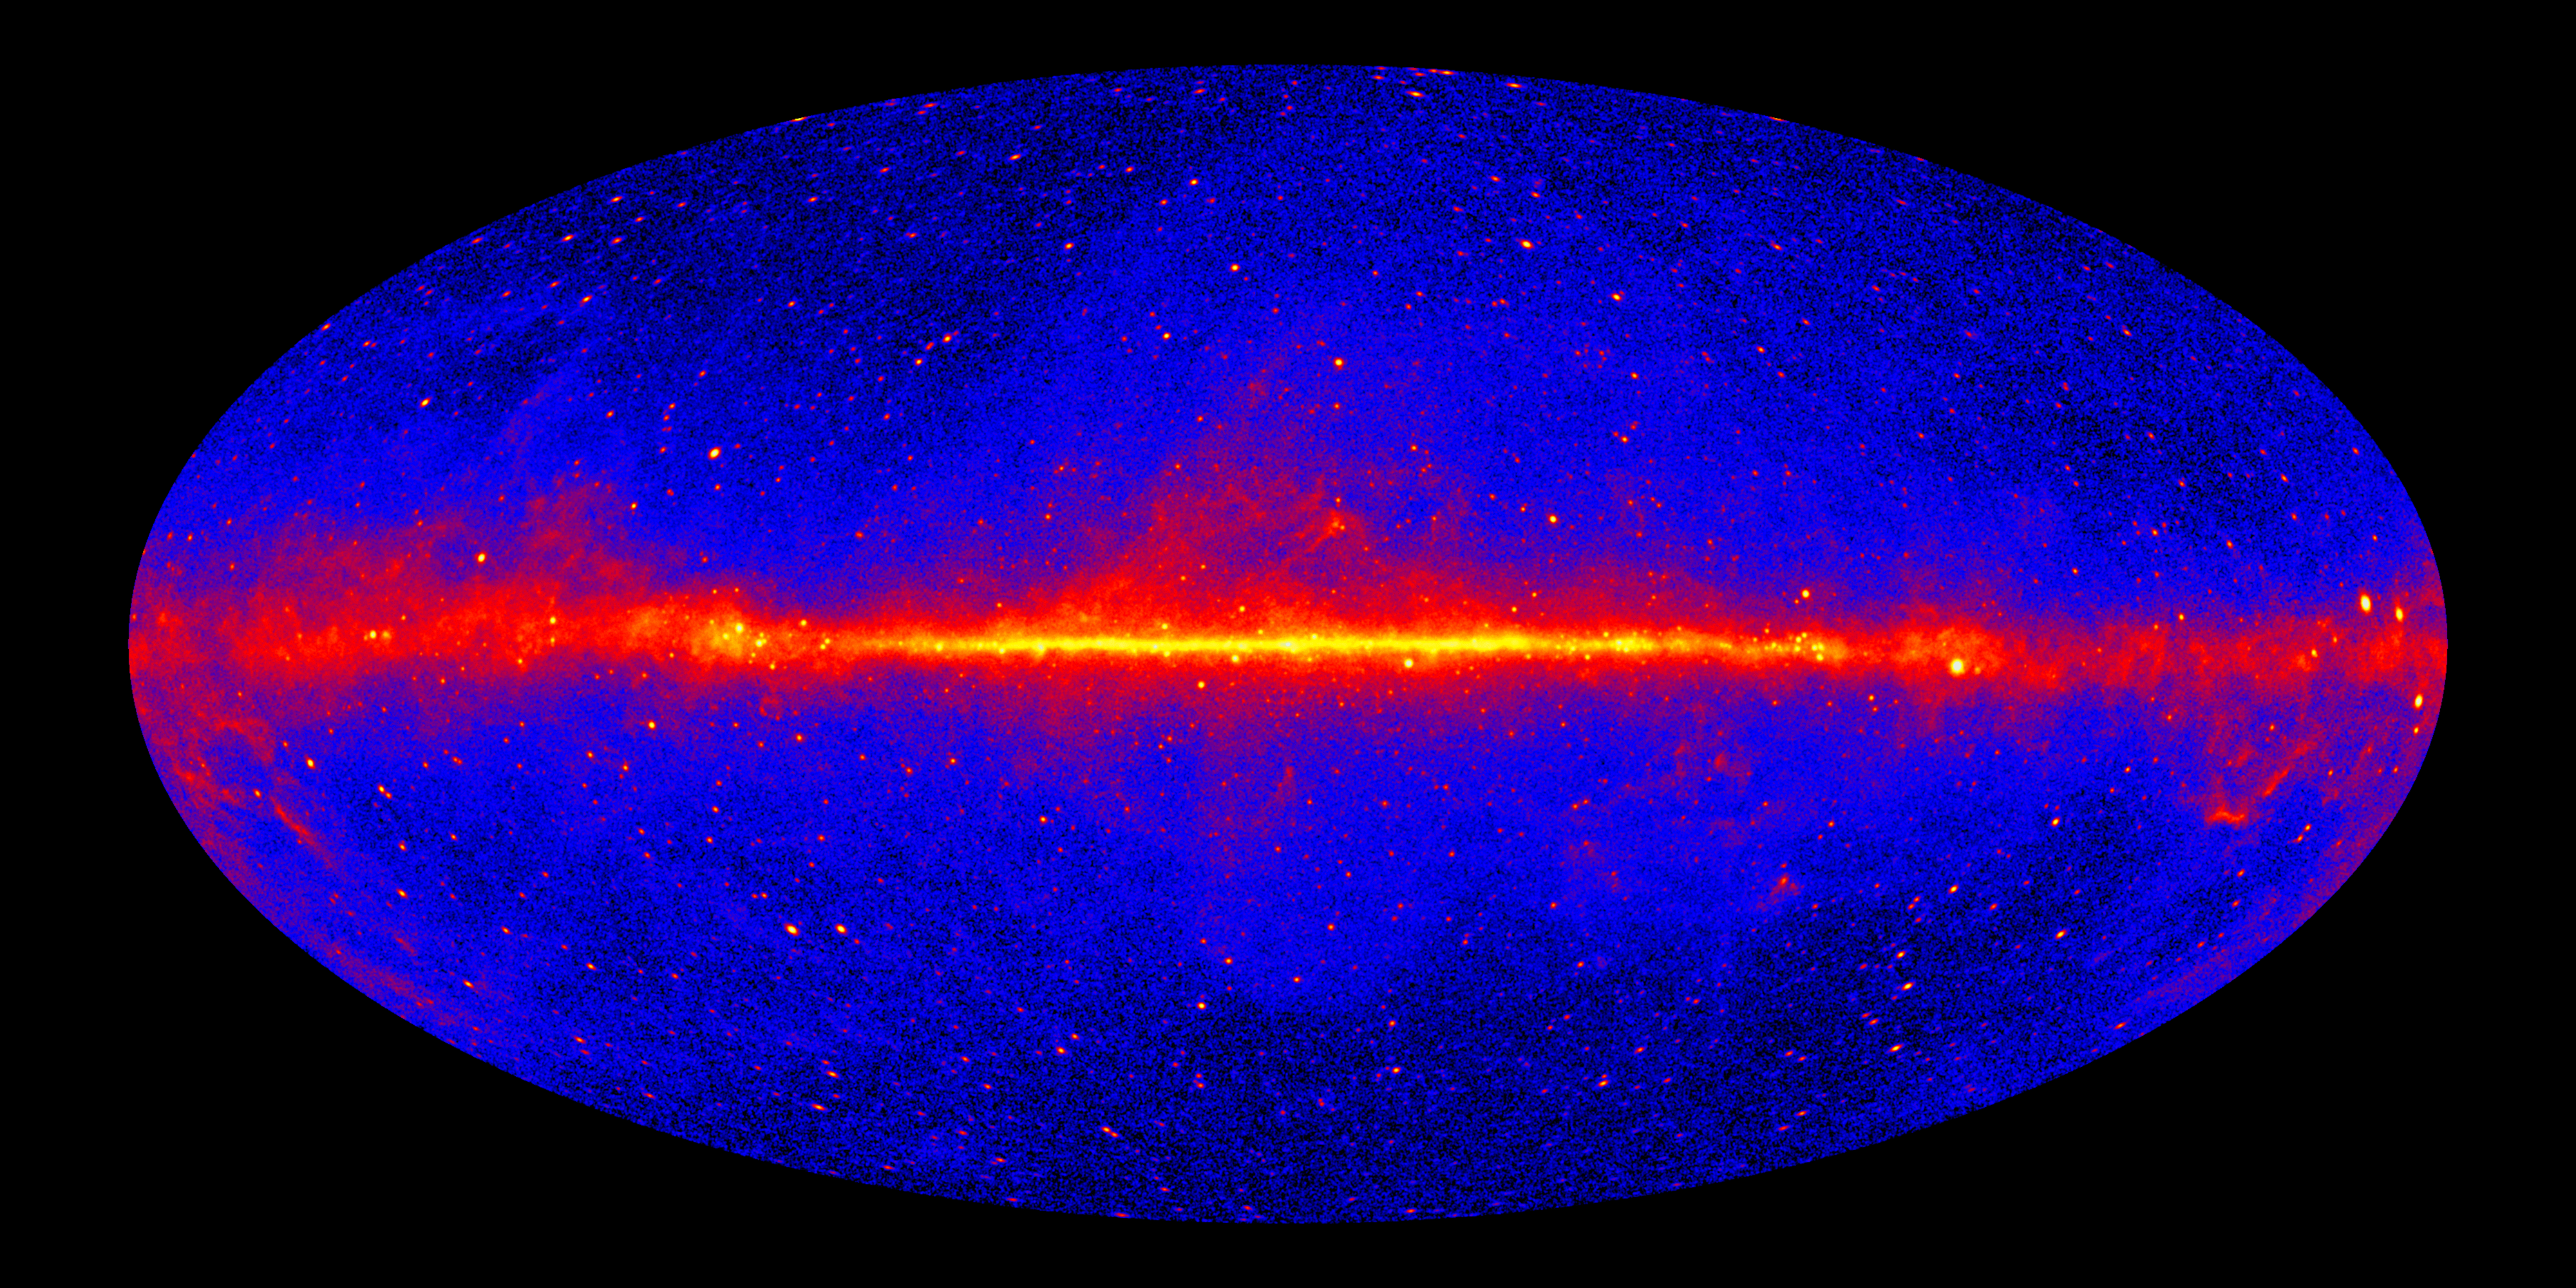 Fermi's 12-year View of the Gamma-ray Sky